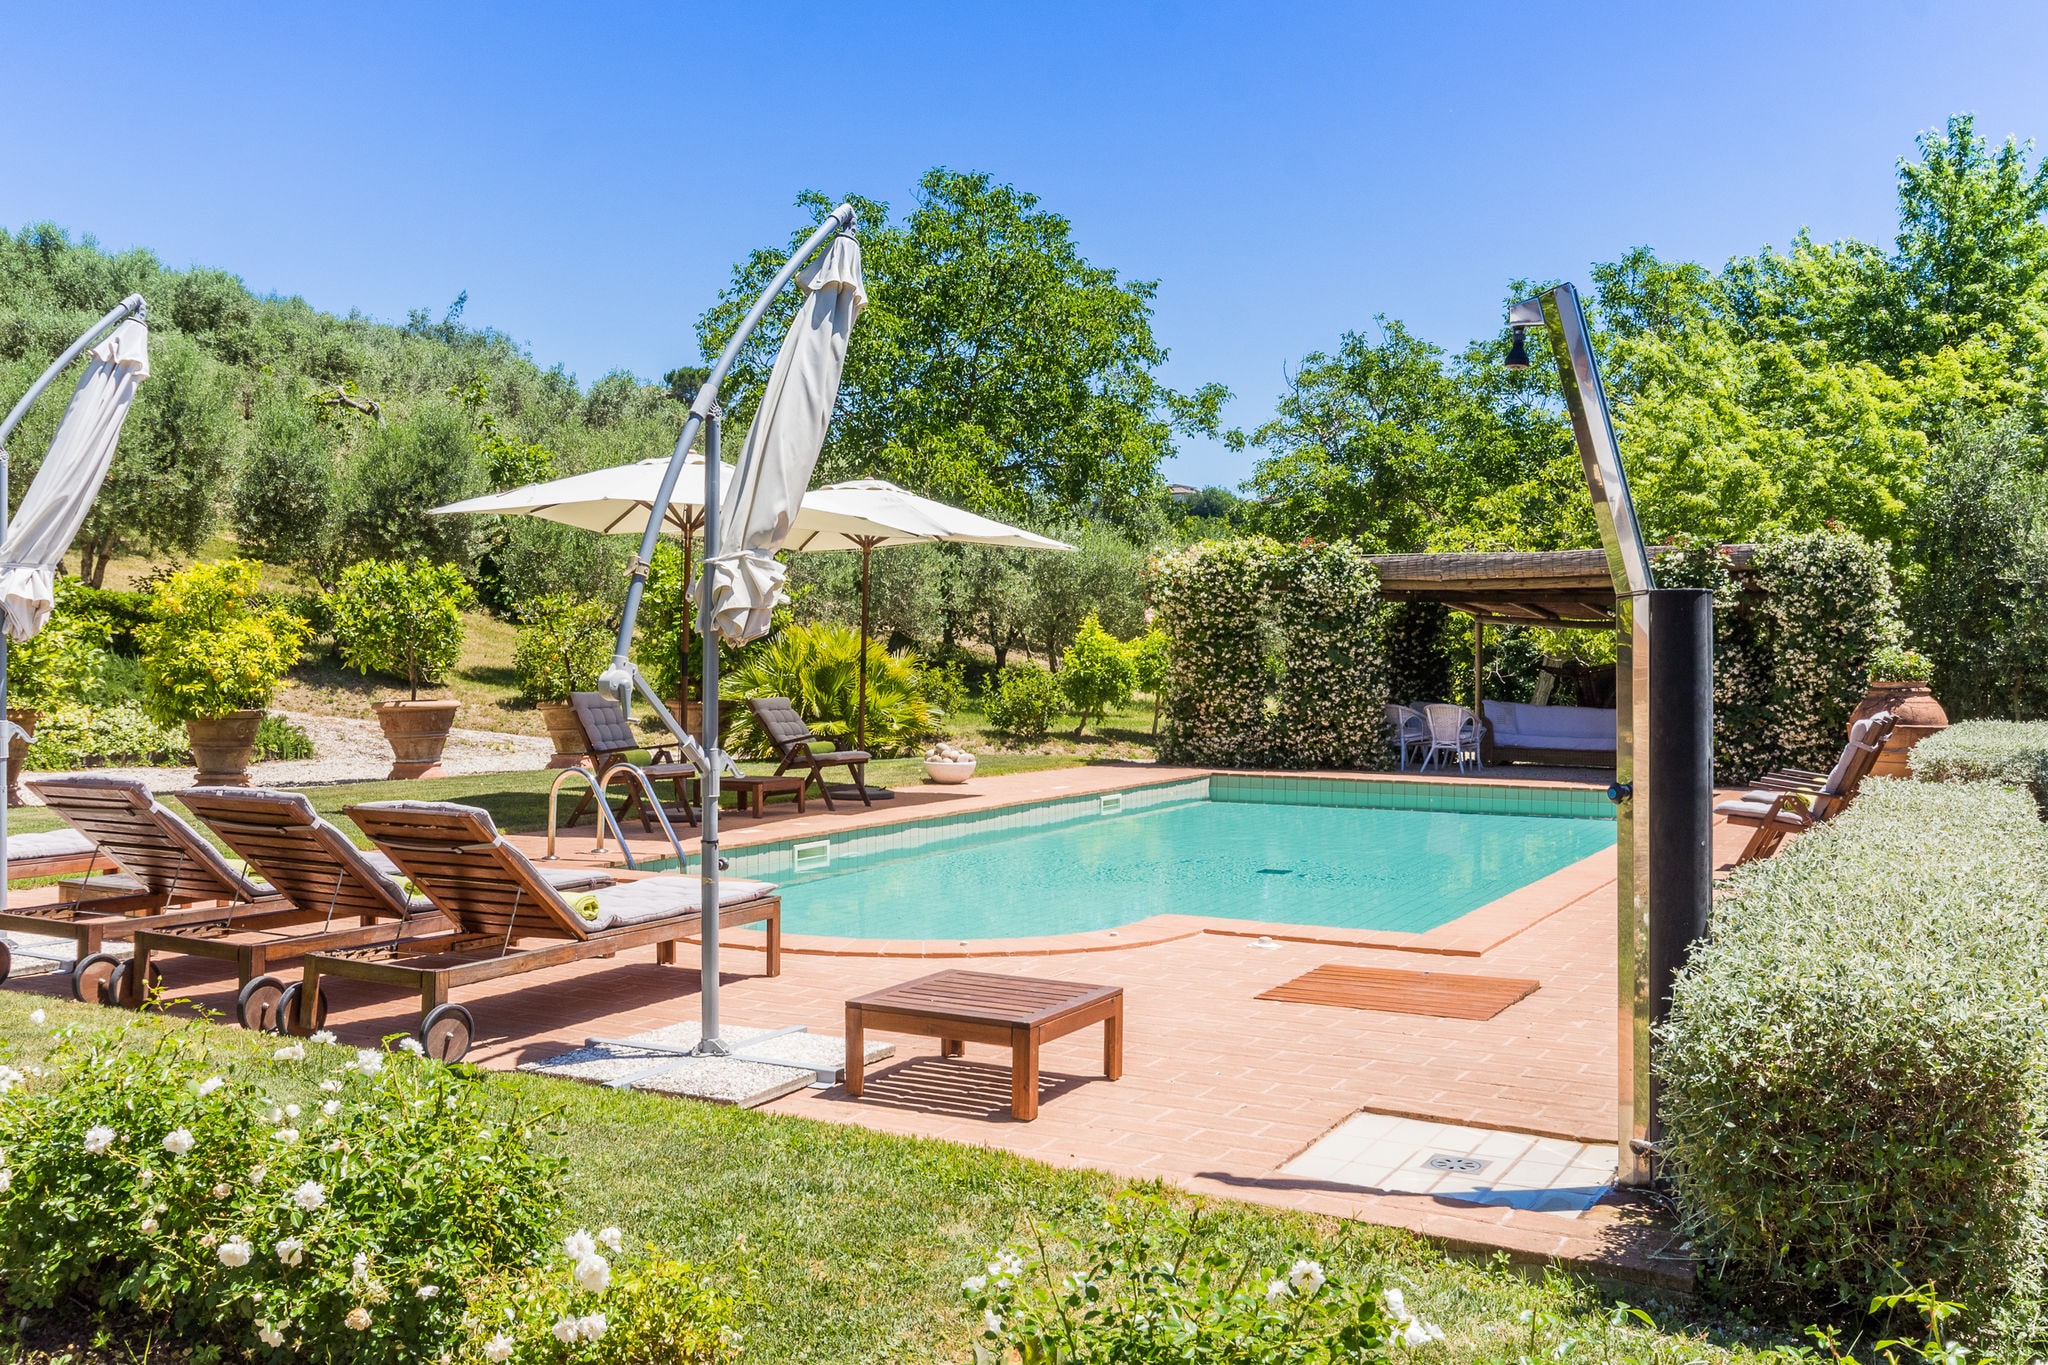 Beautiful villa with a private swimming pool in hilly surroundings